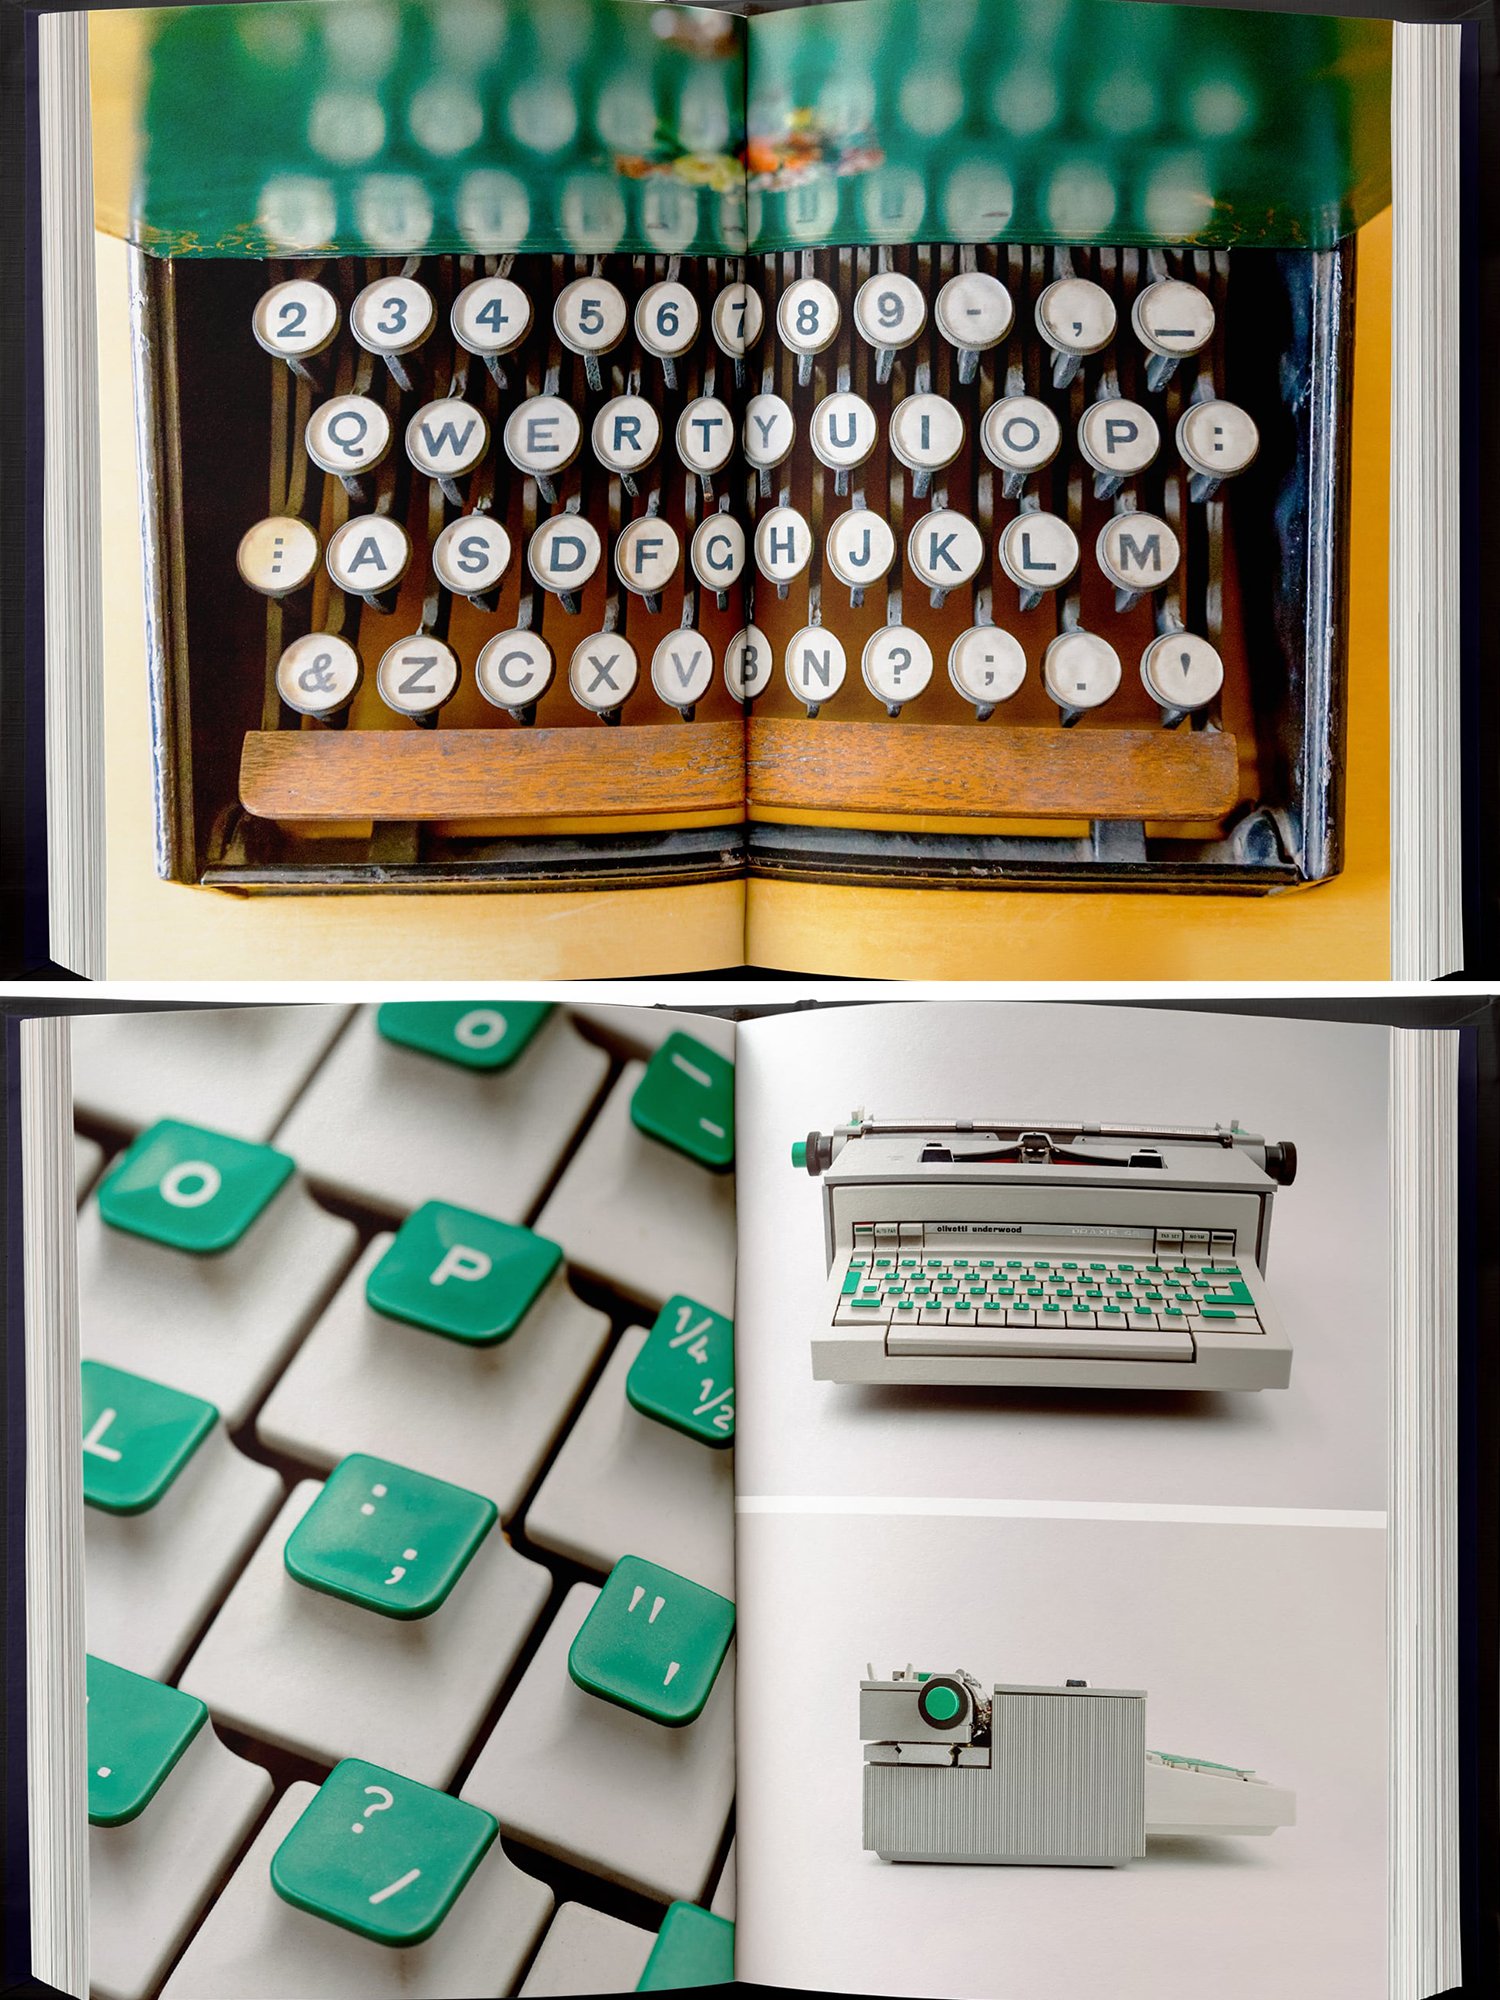 Two photos of book spreads with typewriter and computer images